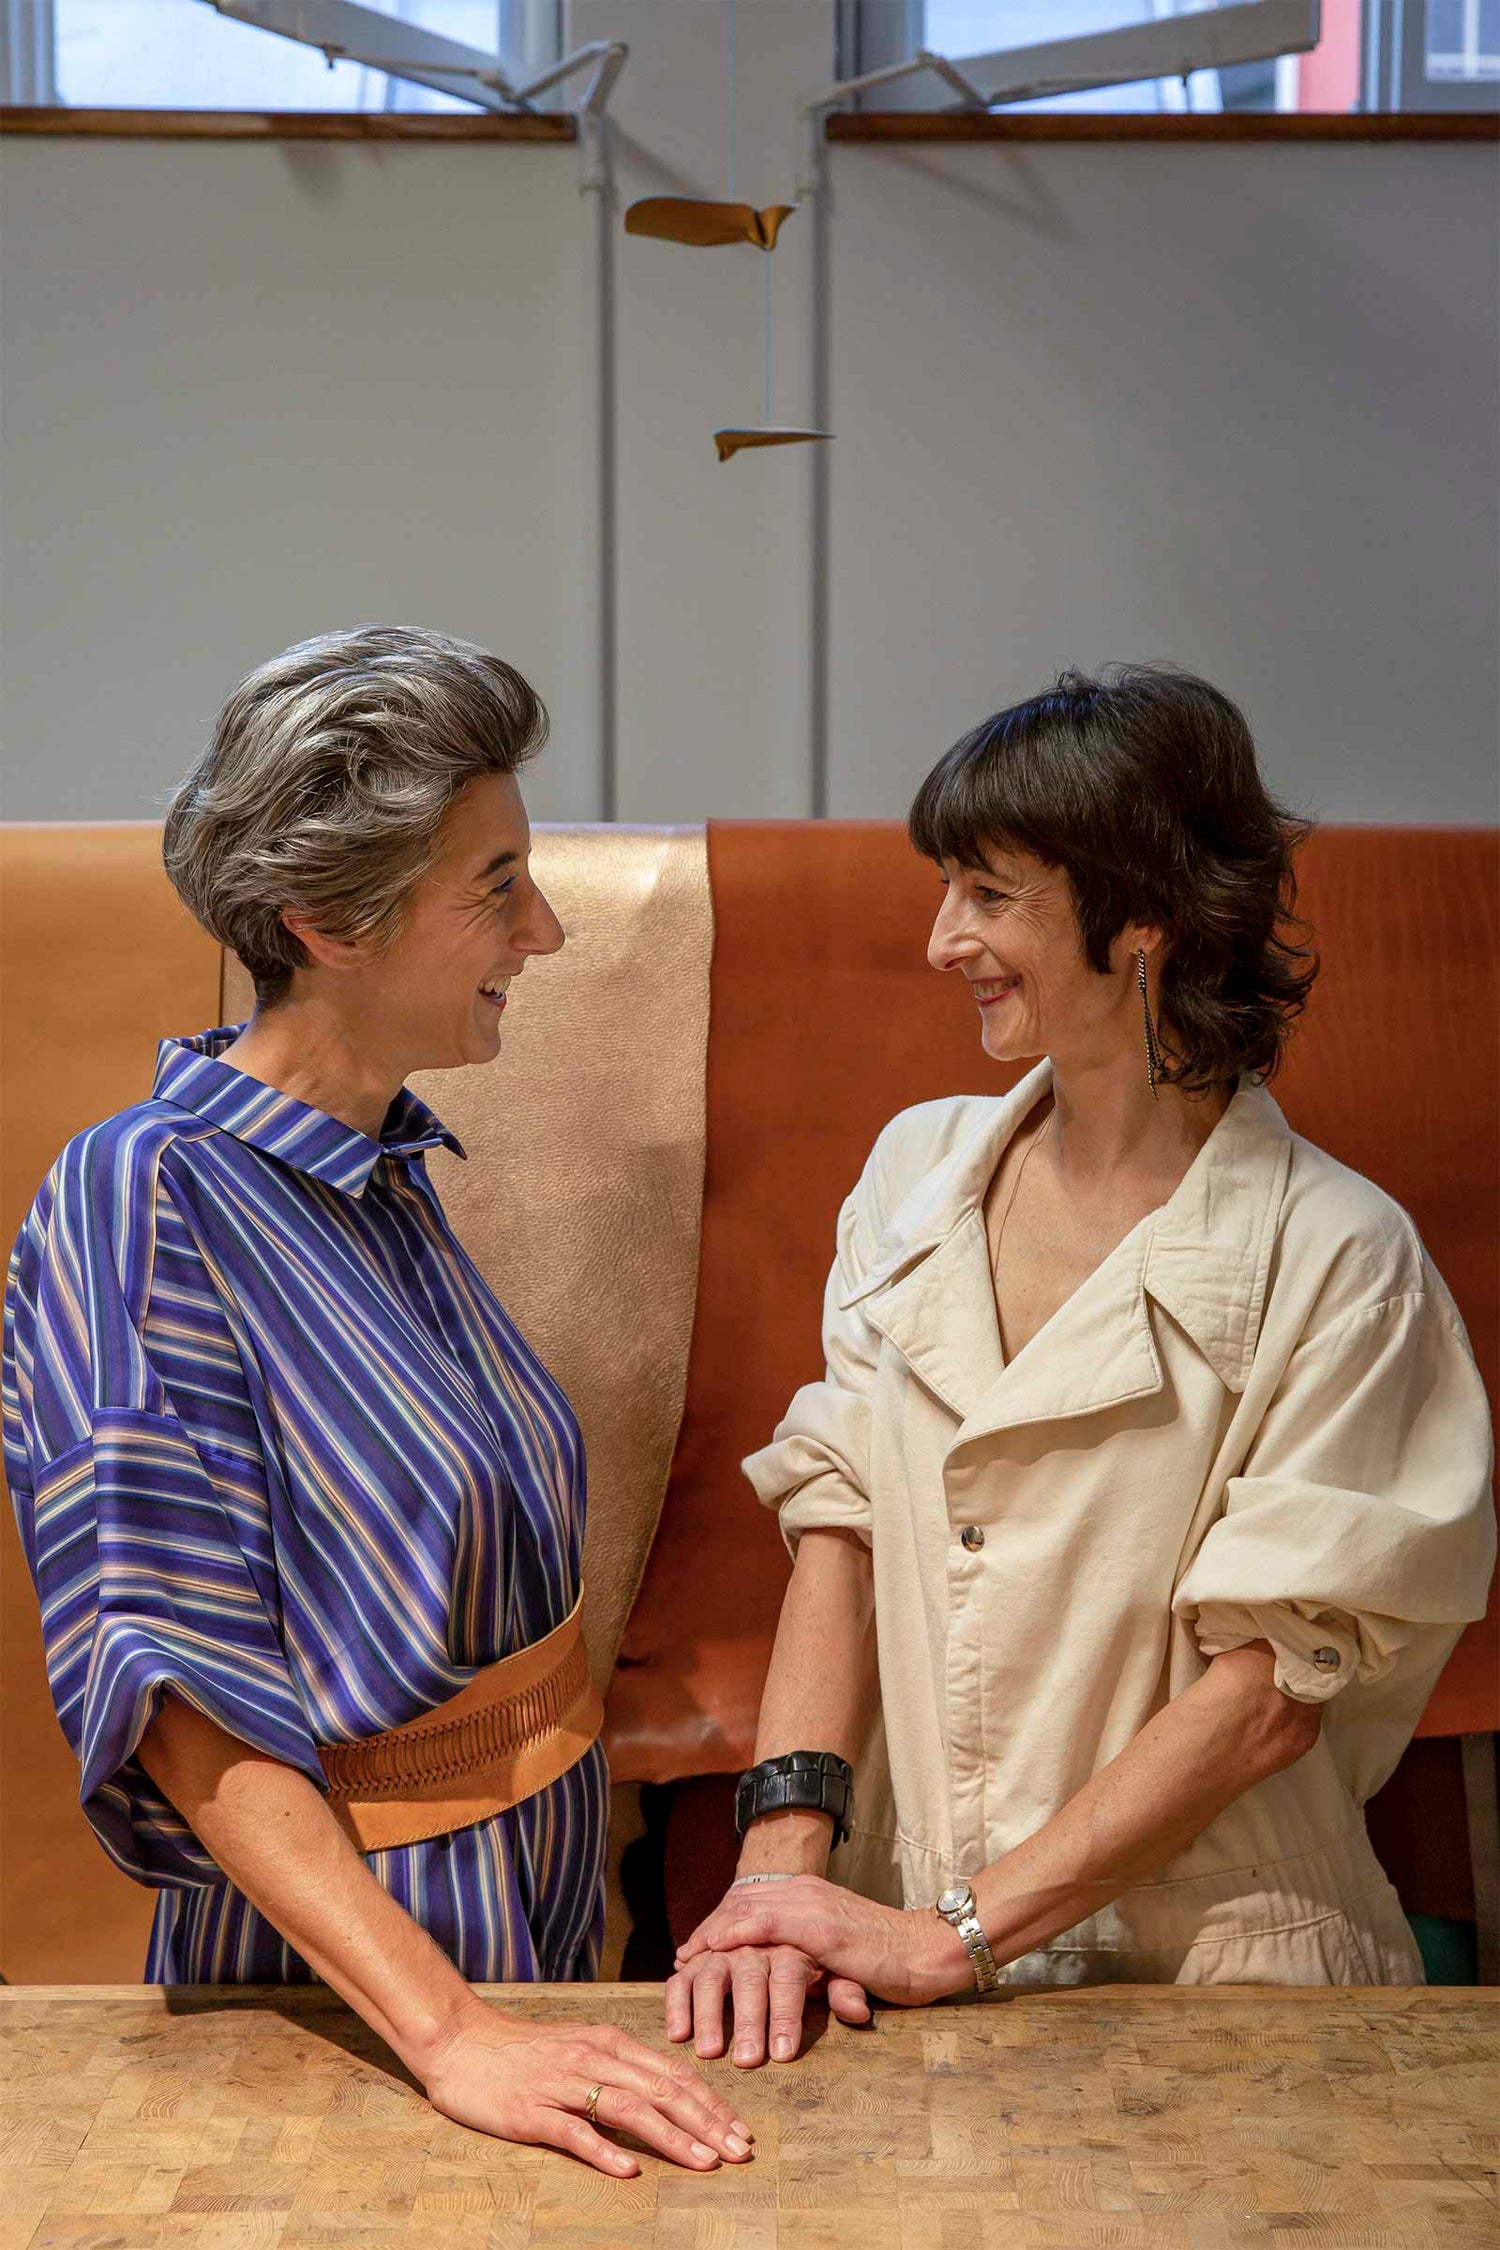 INTERVIEW WITH ANITA MOSER &AMP; SABINE LAUBER FROM BLANCHE BASEL